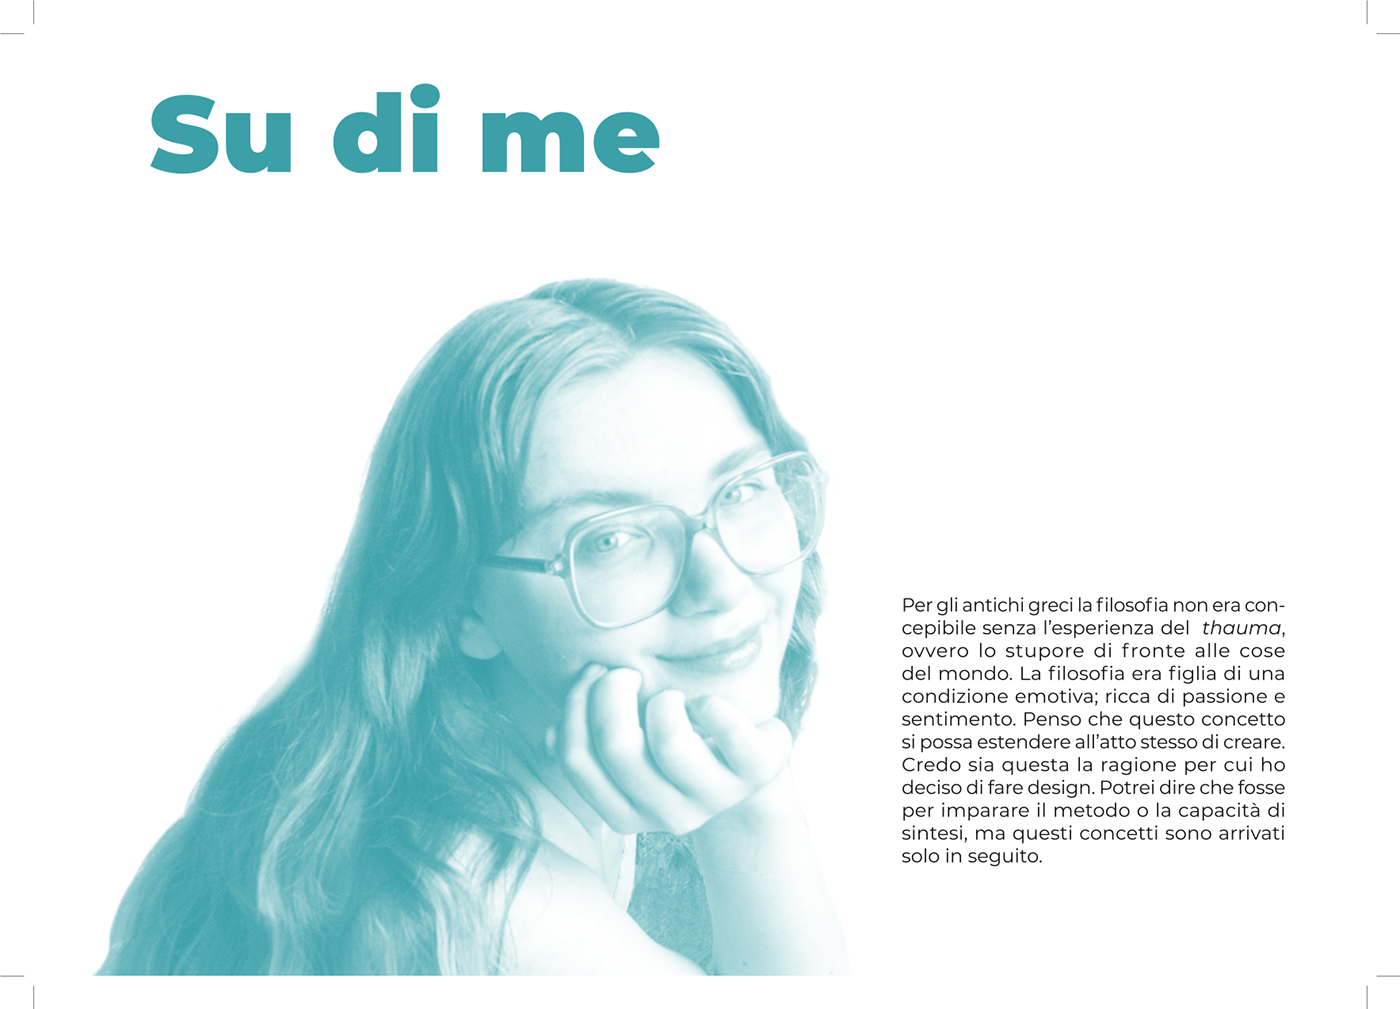 University graphicdesign typography design Layout InDesign editorial design  studentprojects uniproject